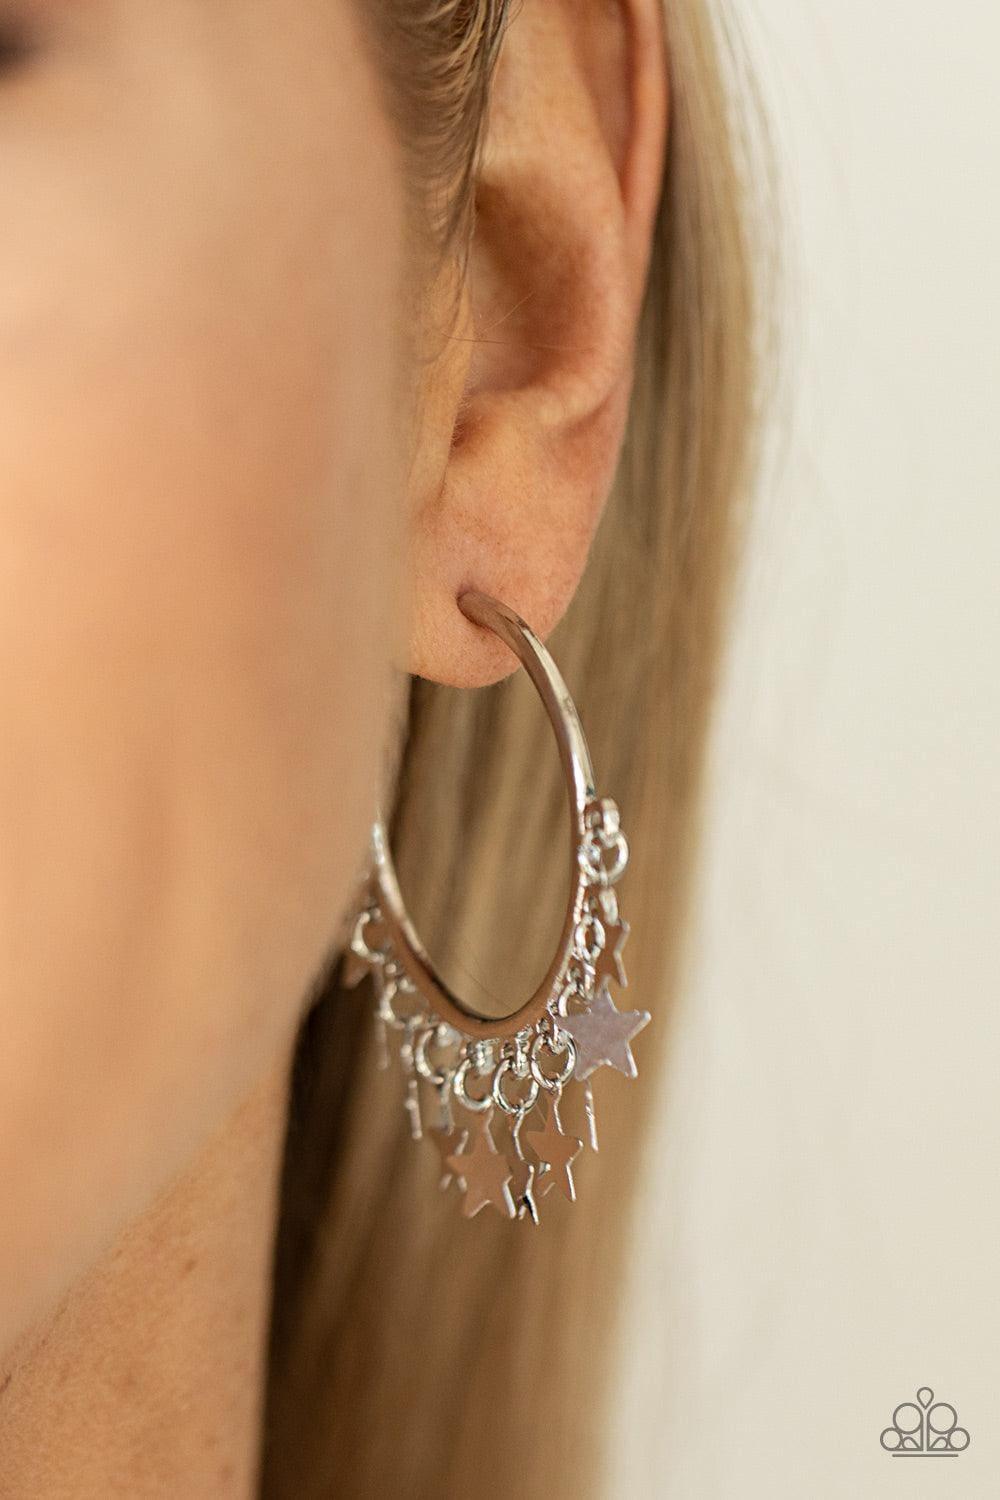 Paparazzi Accessories - Happy Independence Day - Silver Hoop Earrings - Bling by JessieK